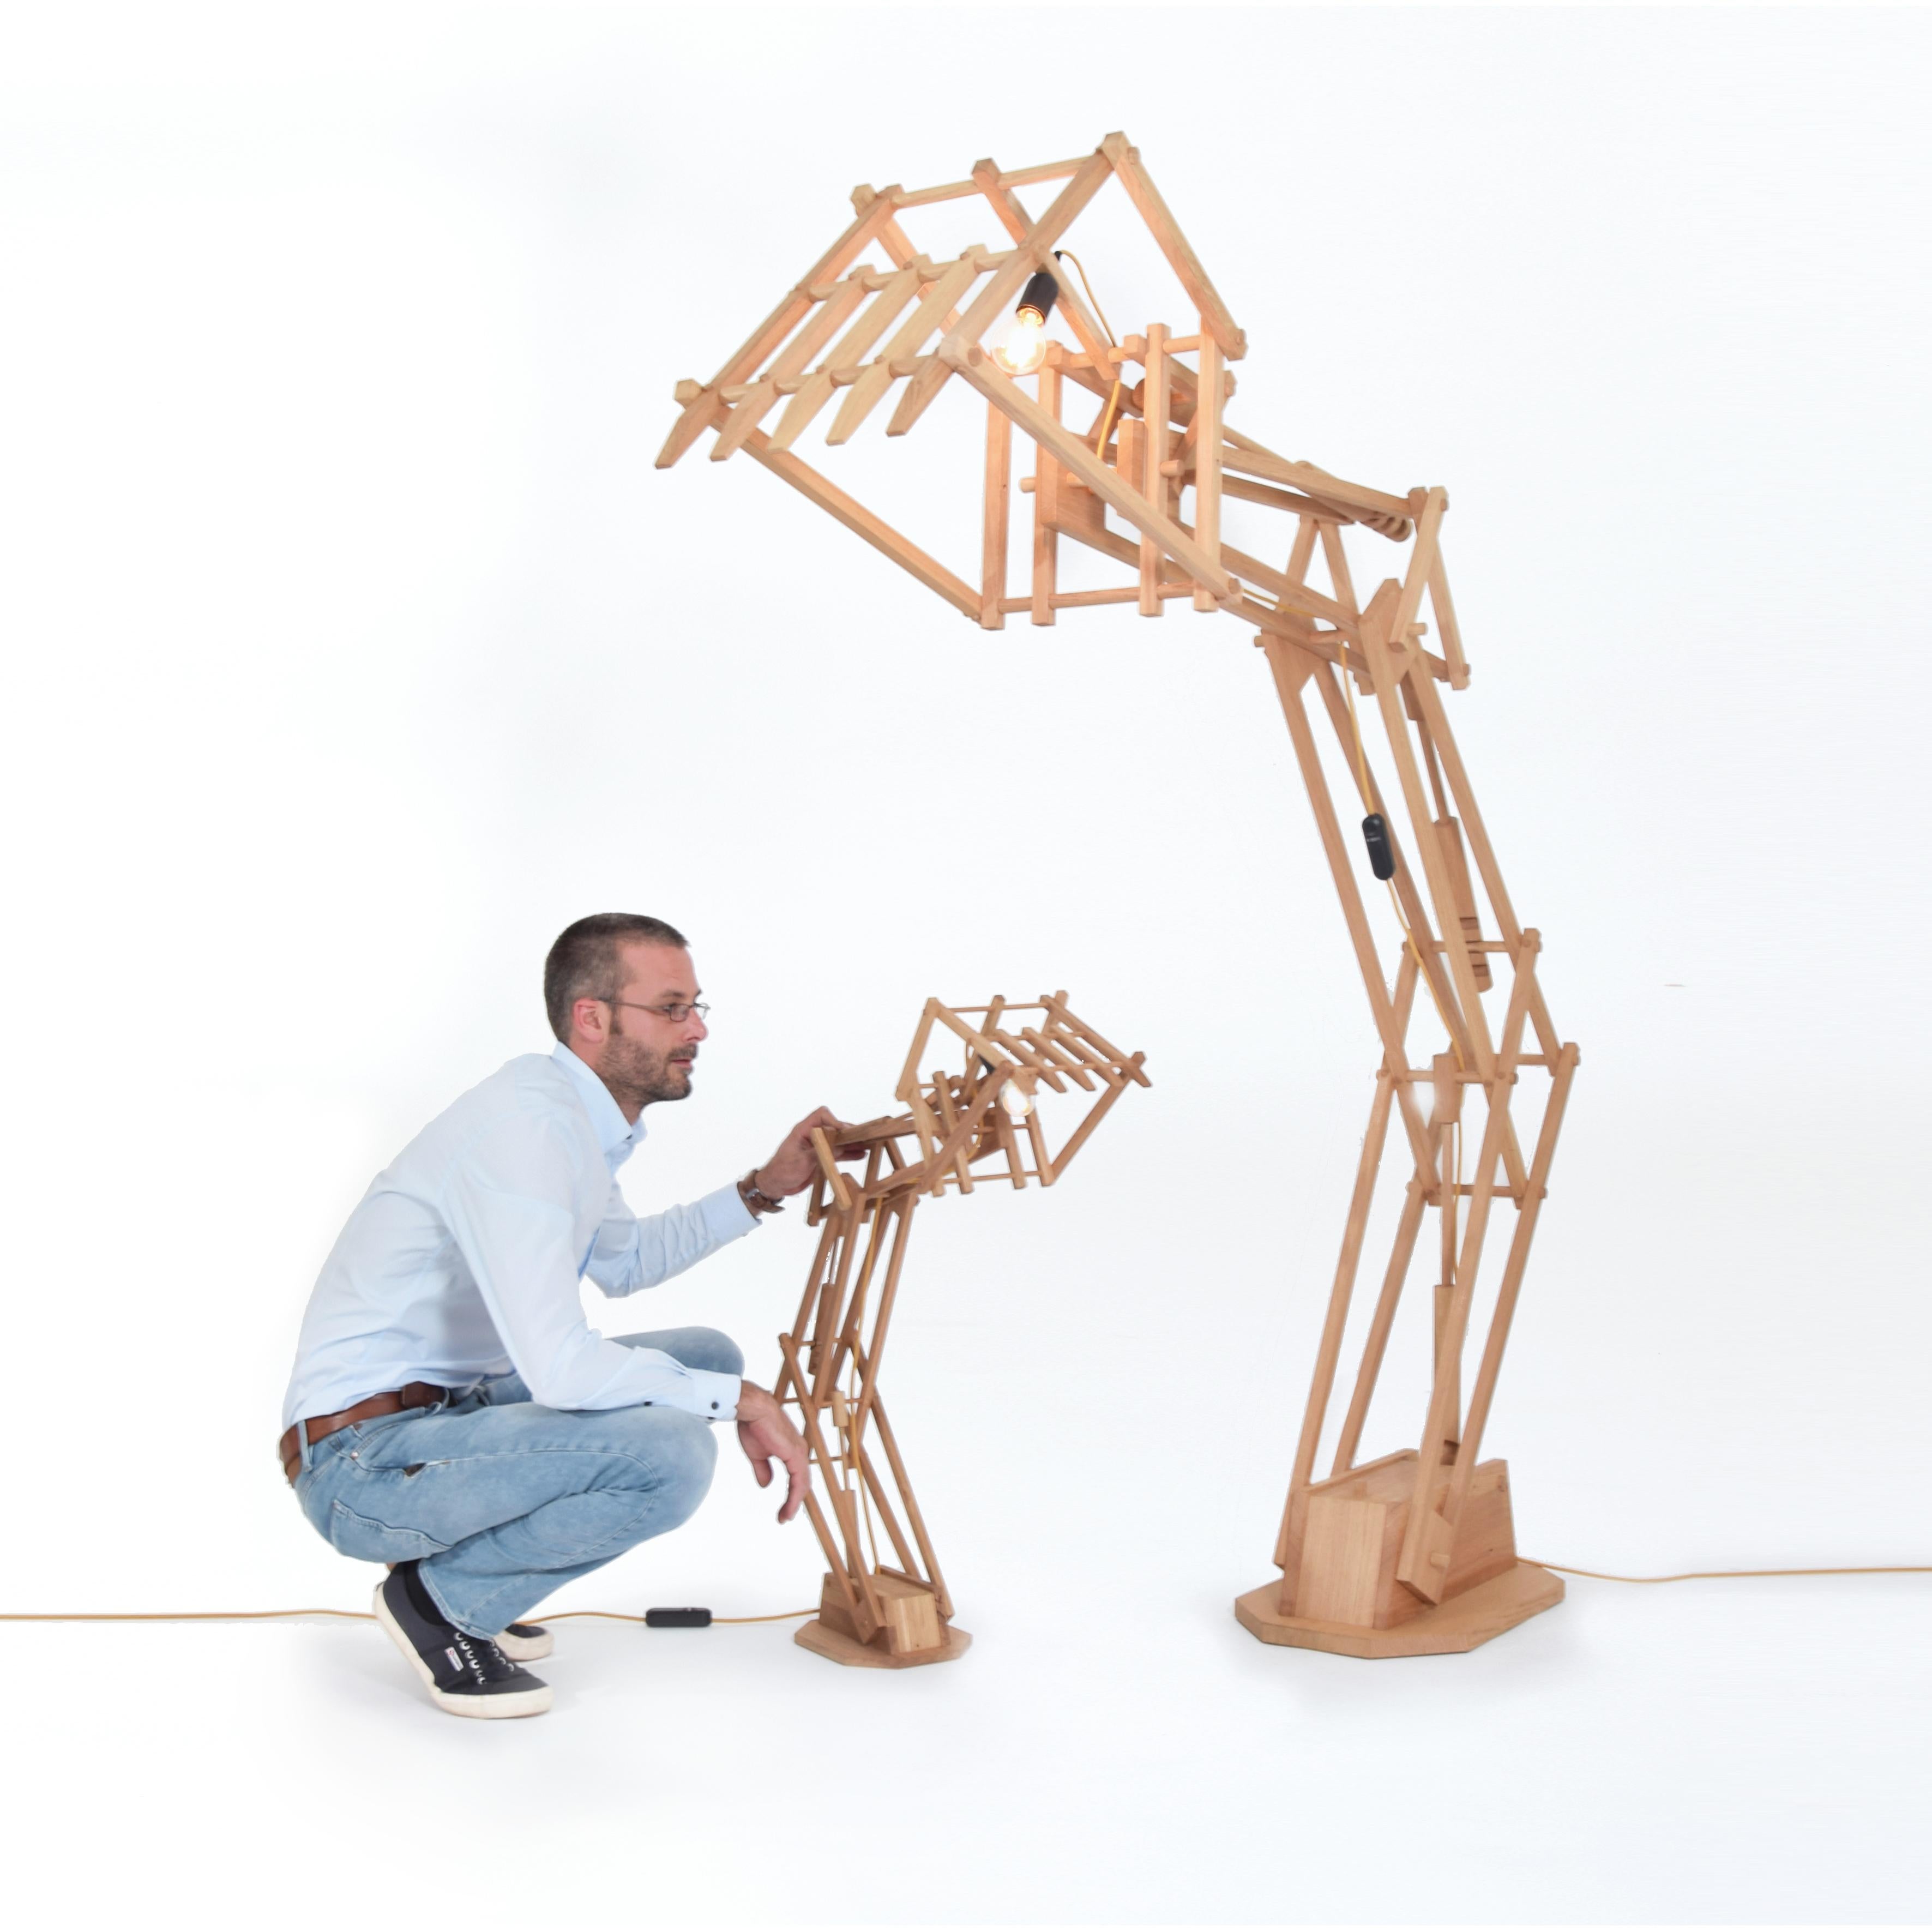 Digit lamp floor by Studio Pin
Dimensions: D 180 x W 37 x H 190 cm 
Materials: Solid oak. 
Weight: 46kg
content: LED dimmer, E27 fitting

Try hard, dig deep, they said. Can you dig it? This digger is a handmade light fixtures made out of